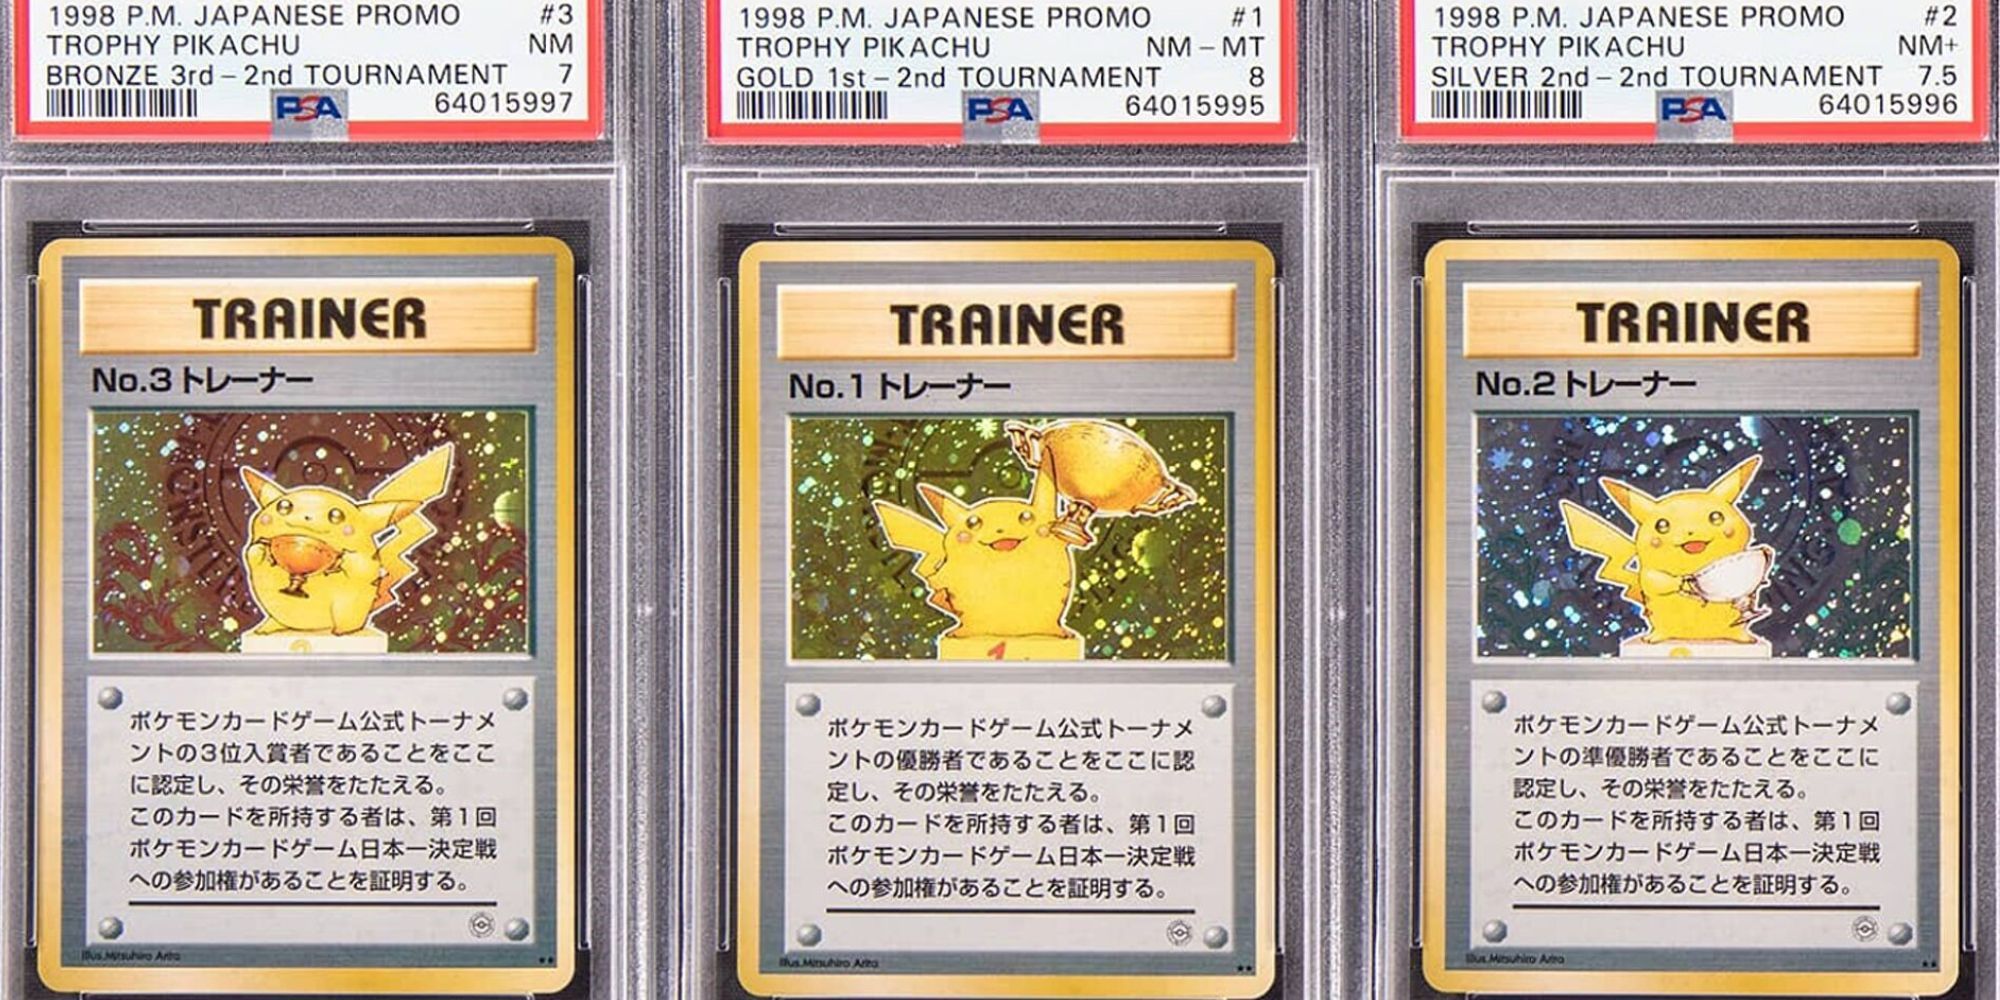 A rare first edition Pokémon card sells for more than $300,000 at auction